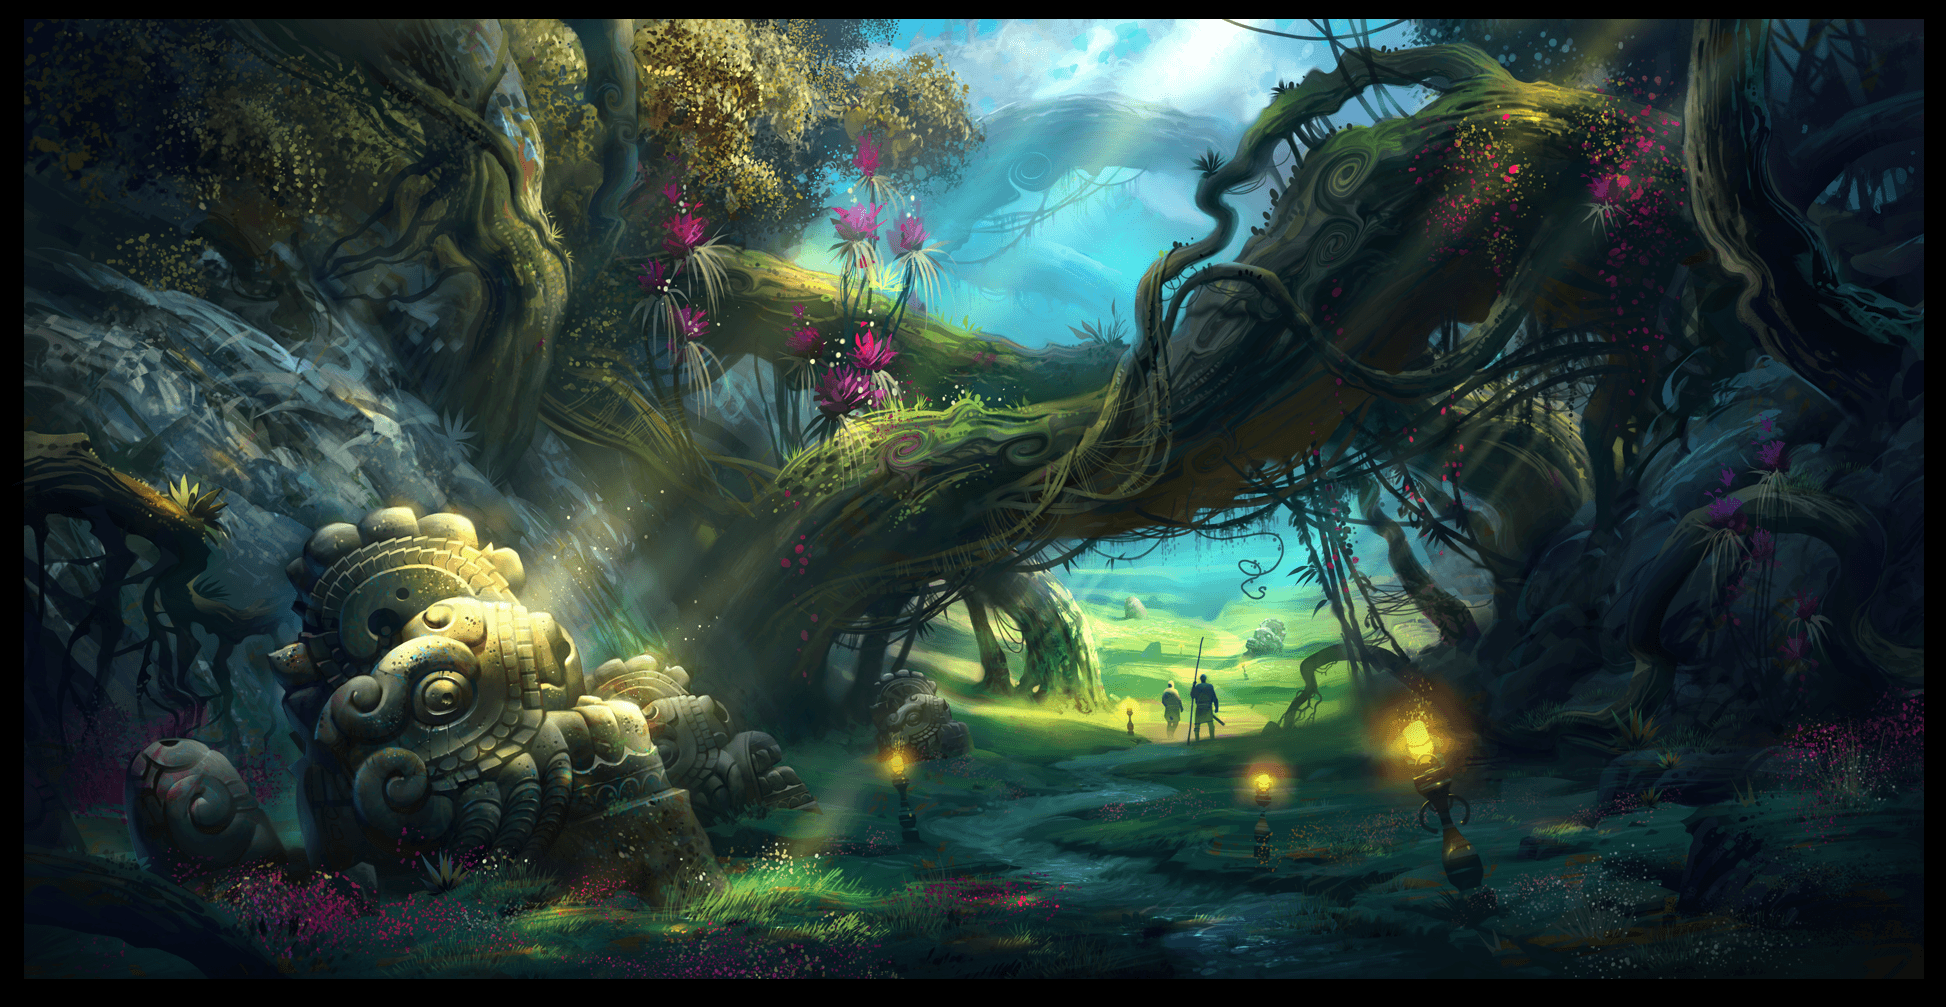 Enchanted Magical Forest Enchanted Forest By Adimono On